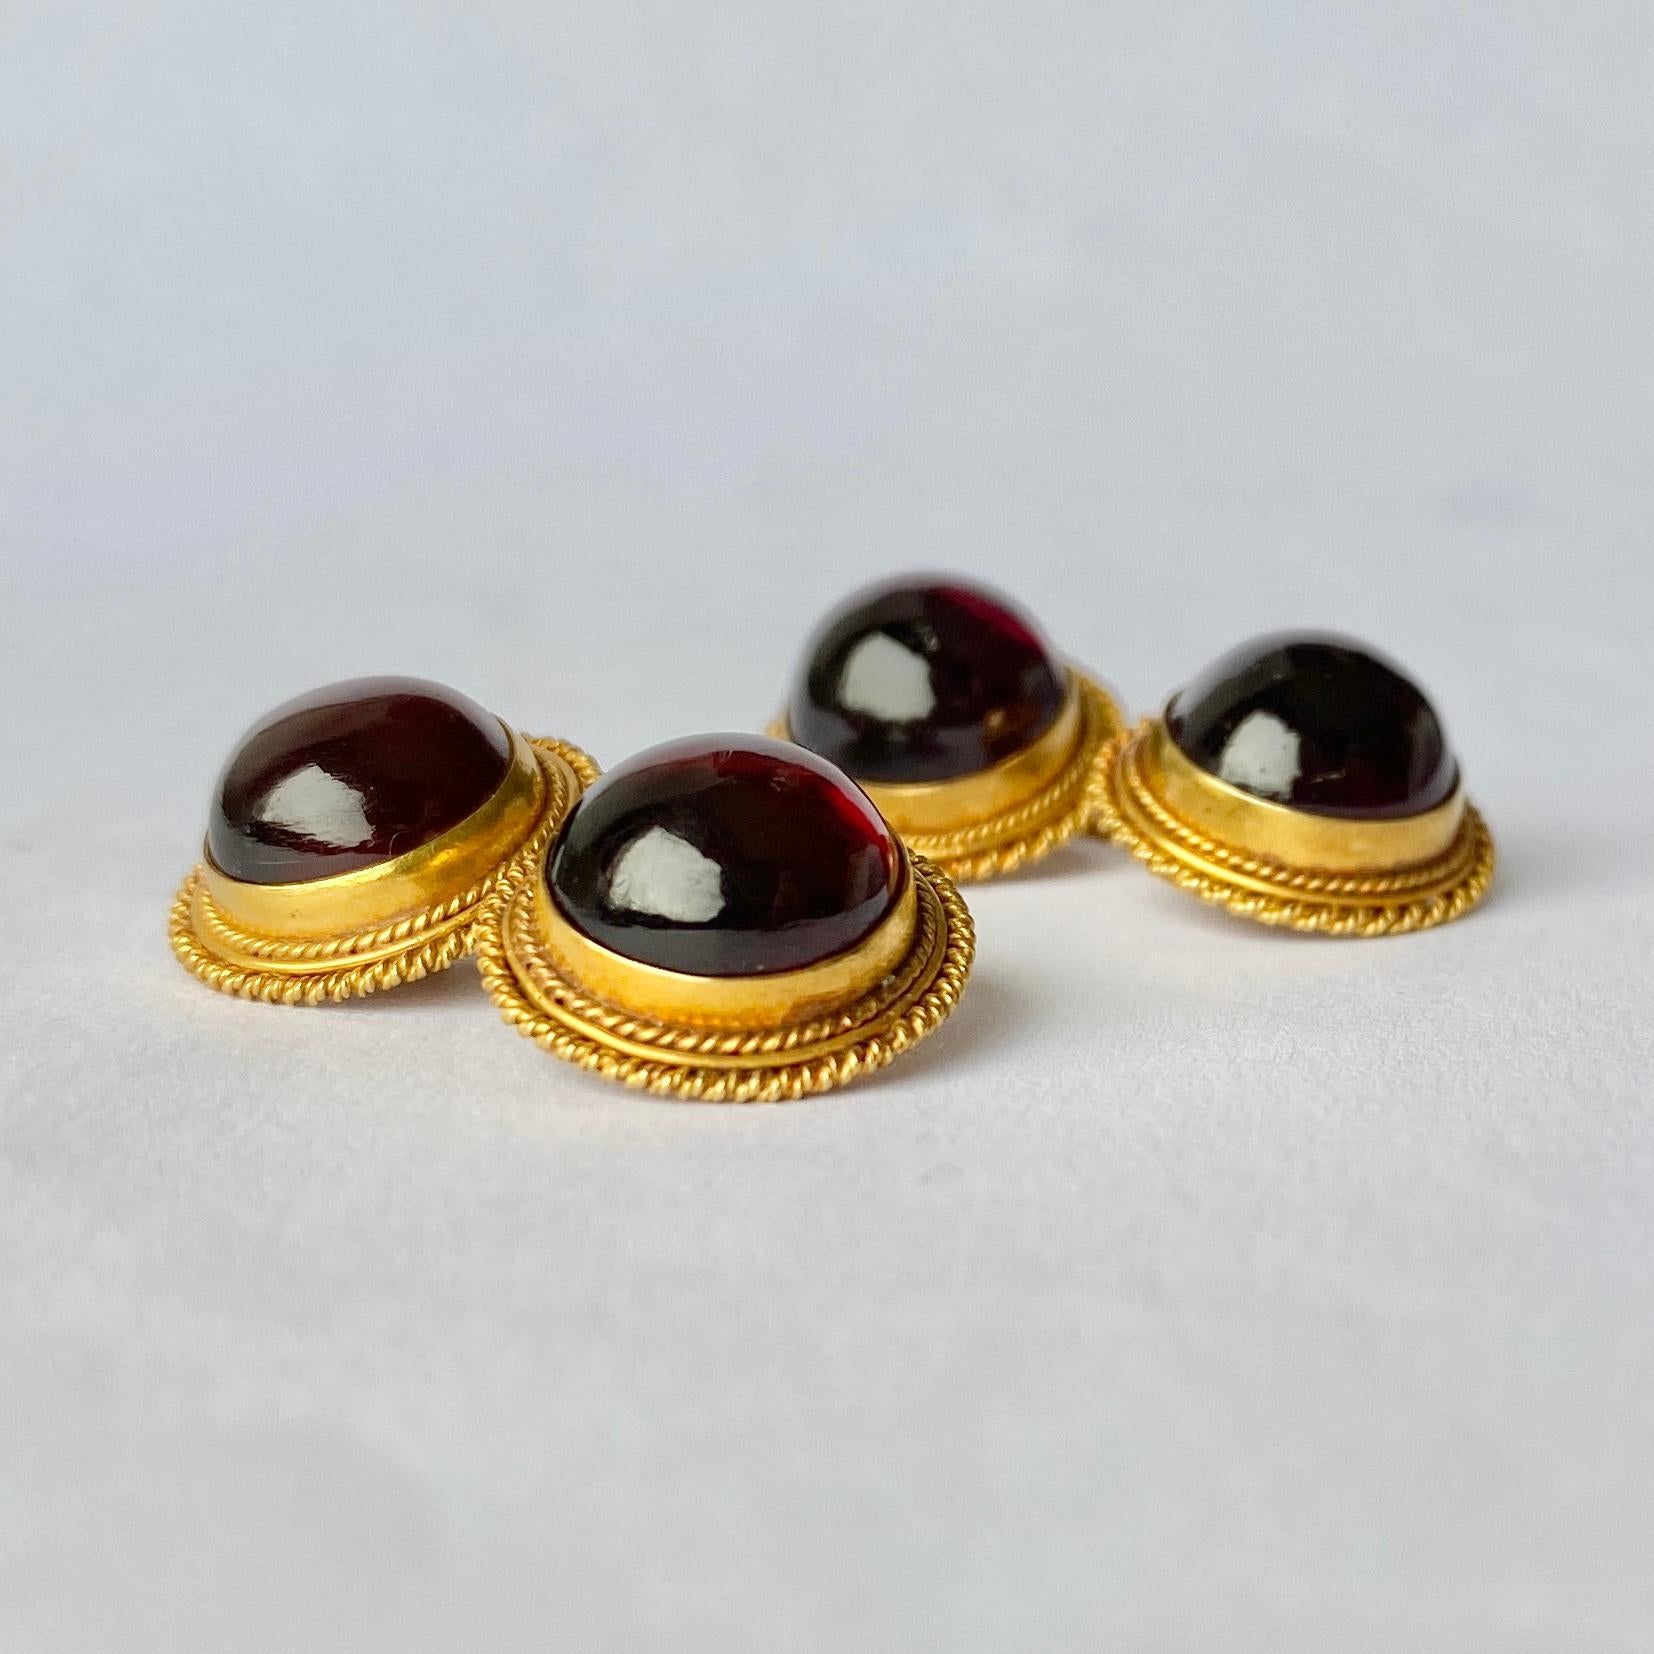 These gorgeous cufflinks hold a cabachon garnet which is surrounded by rope twist detail. They are modelled in 18ct yellow gold. 

Cufflink Diameter: 8mm

Weight: 8.3g